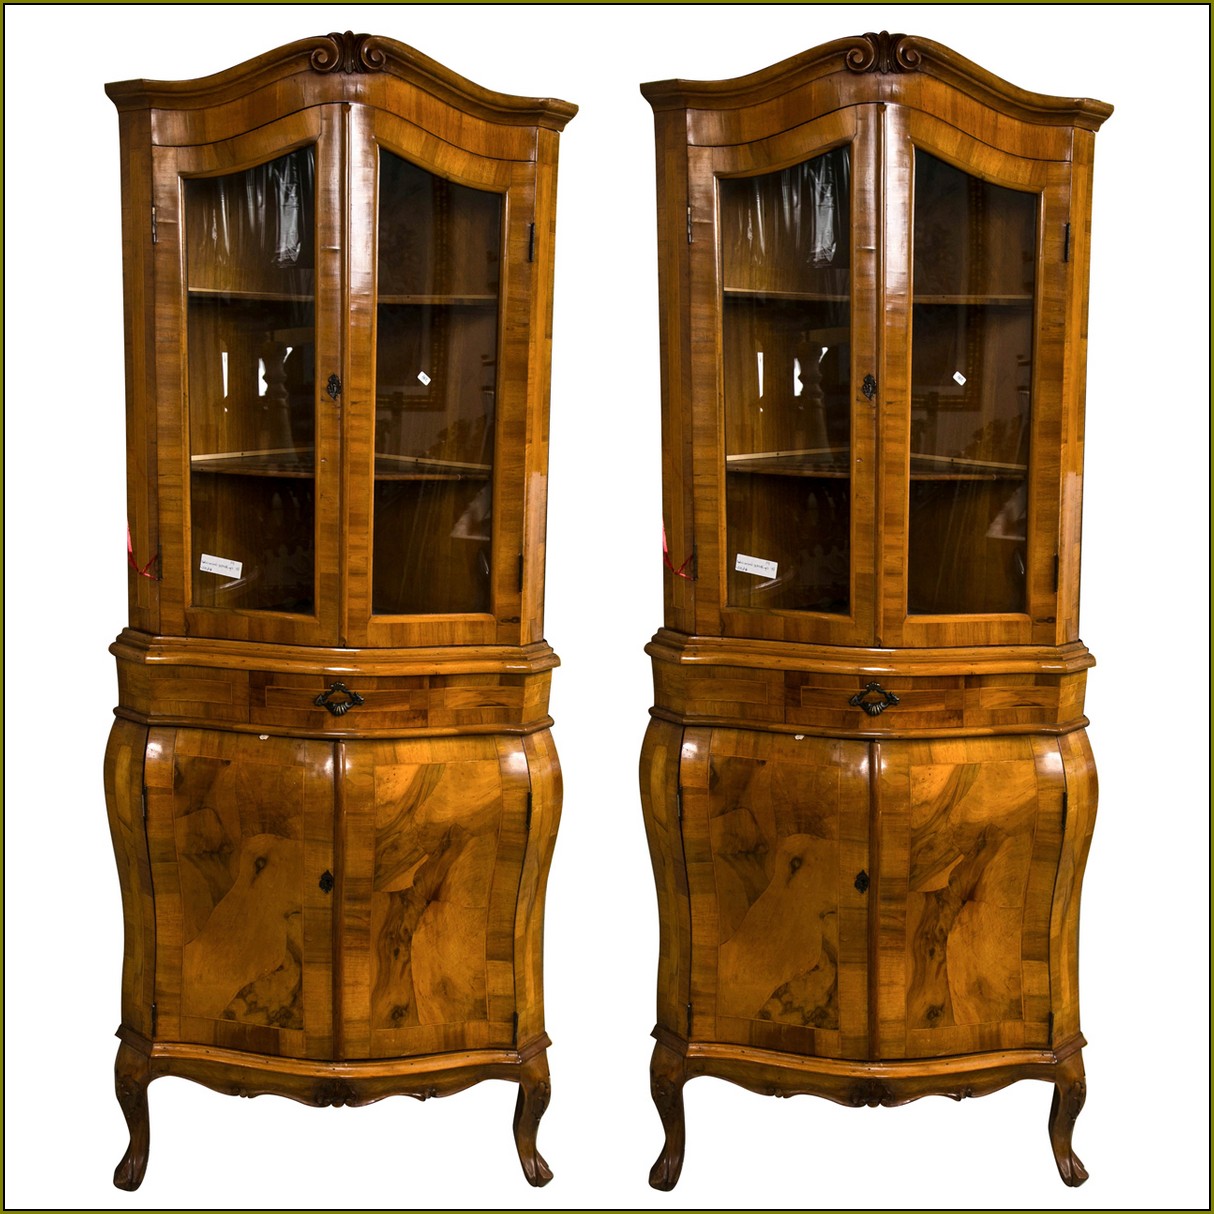 Antique China Cabinets 1800s